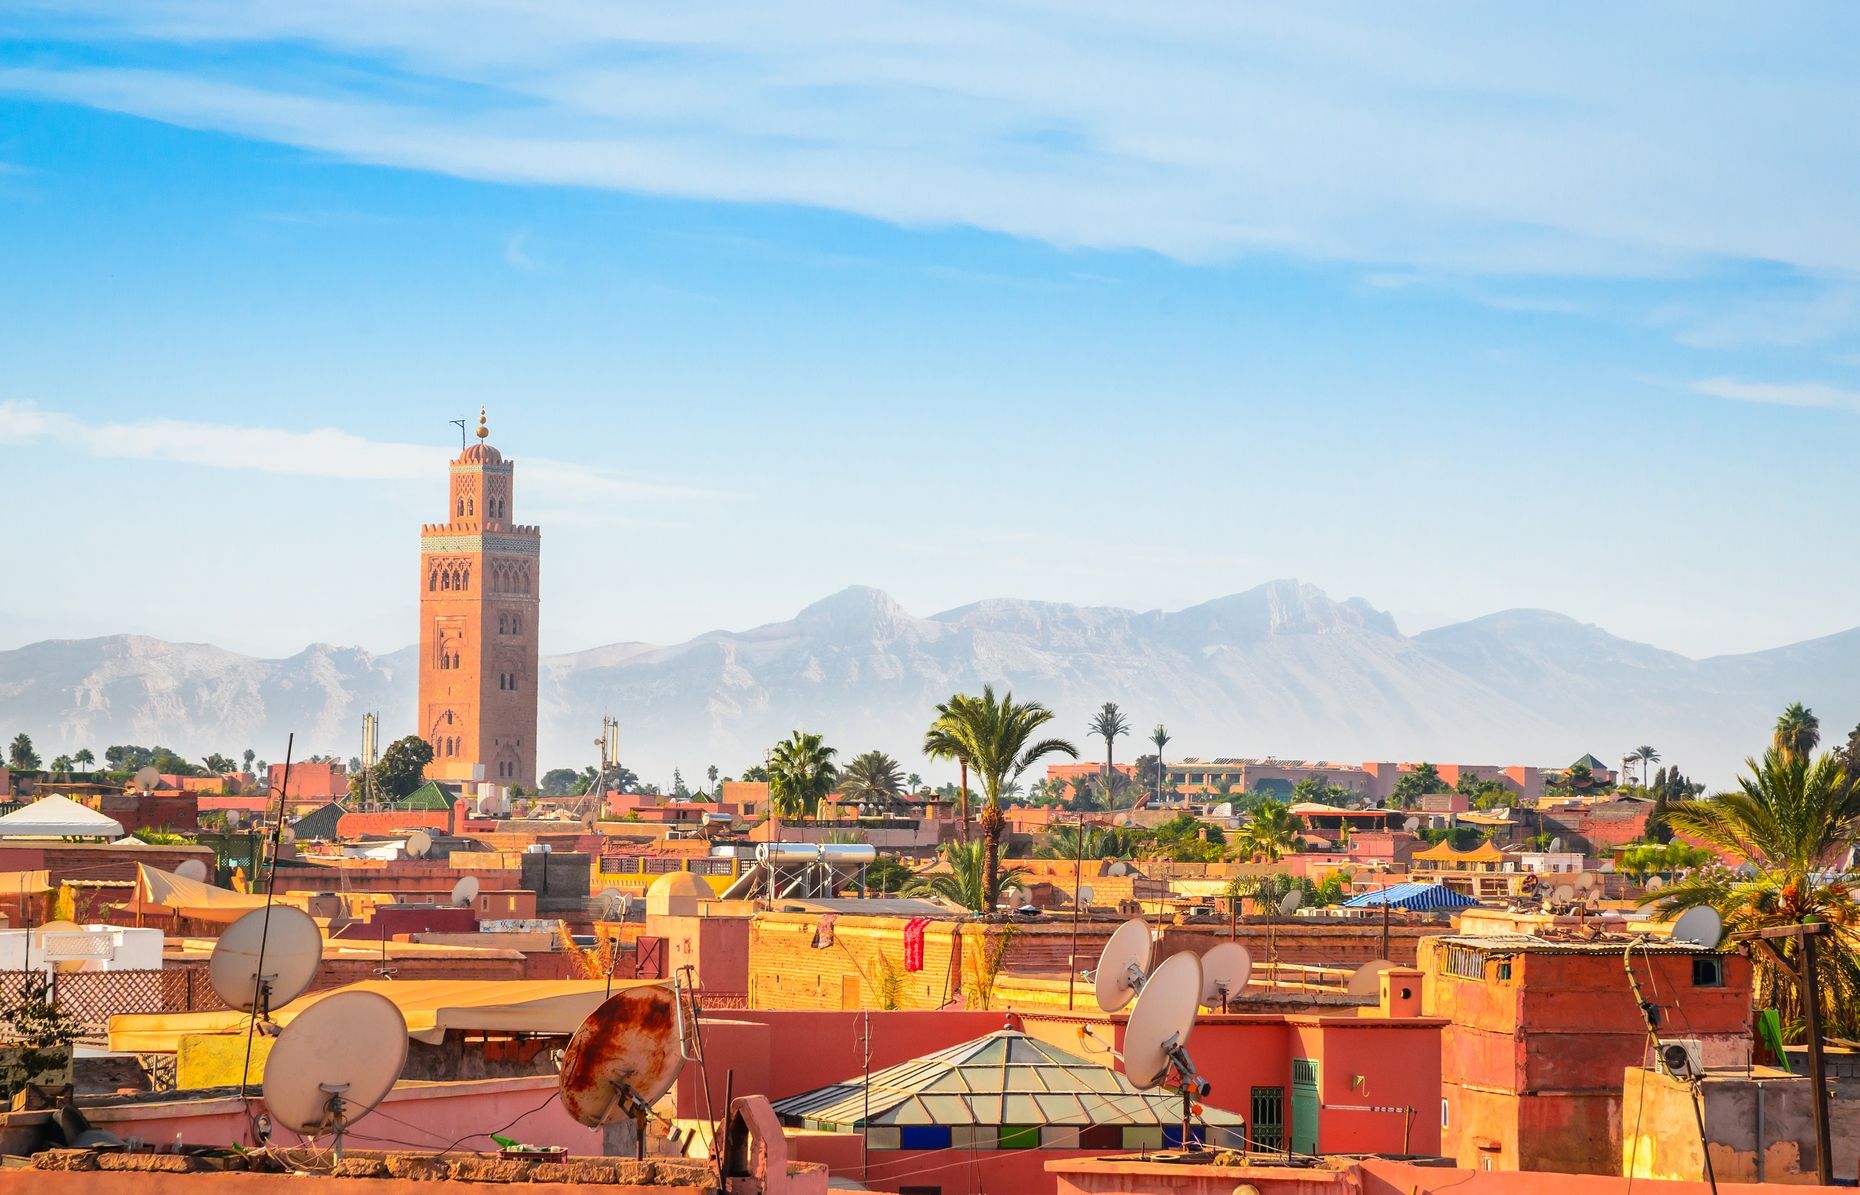 <p>This gateway to the Sahara Desert is a touristy and <a href="https://globalcastaway.com/what-not-to-do-in-marrakesh/">bustling city</a> that, while popular to visit, is best to be avoided. In Marrakech, Morocco visitors will experience <a href="https://anywhereweroam.com/is-marrakech-safe/#:~:text=But%20Marrakech%20does%20have%20its,can%20be%20difficult%20to%20shake.">verbal harassment</a> from locals who are trying to sell you trinkets and fake guides willing to take your money for a sham tour. Instead, book a flight to these seaside Moroccan cities along the Atlantic Coast: <a href="https://www.tripadvisor.ca/Tourism-g293737-Tangier_Tanger_Tetouan_Al_Hoceima-Vacations.html">Tangier</a>, Rabat, or Essaouira. </p>